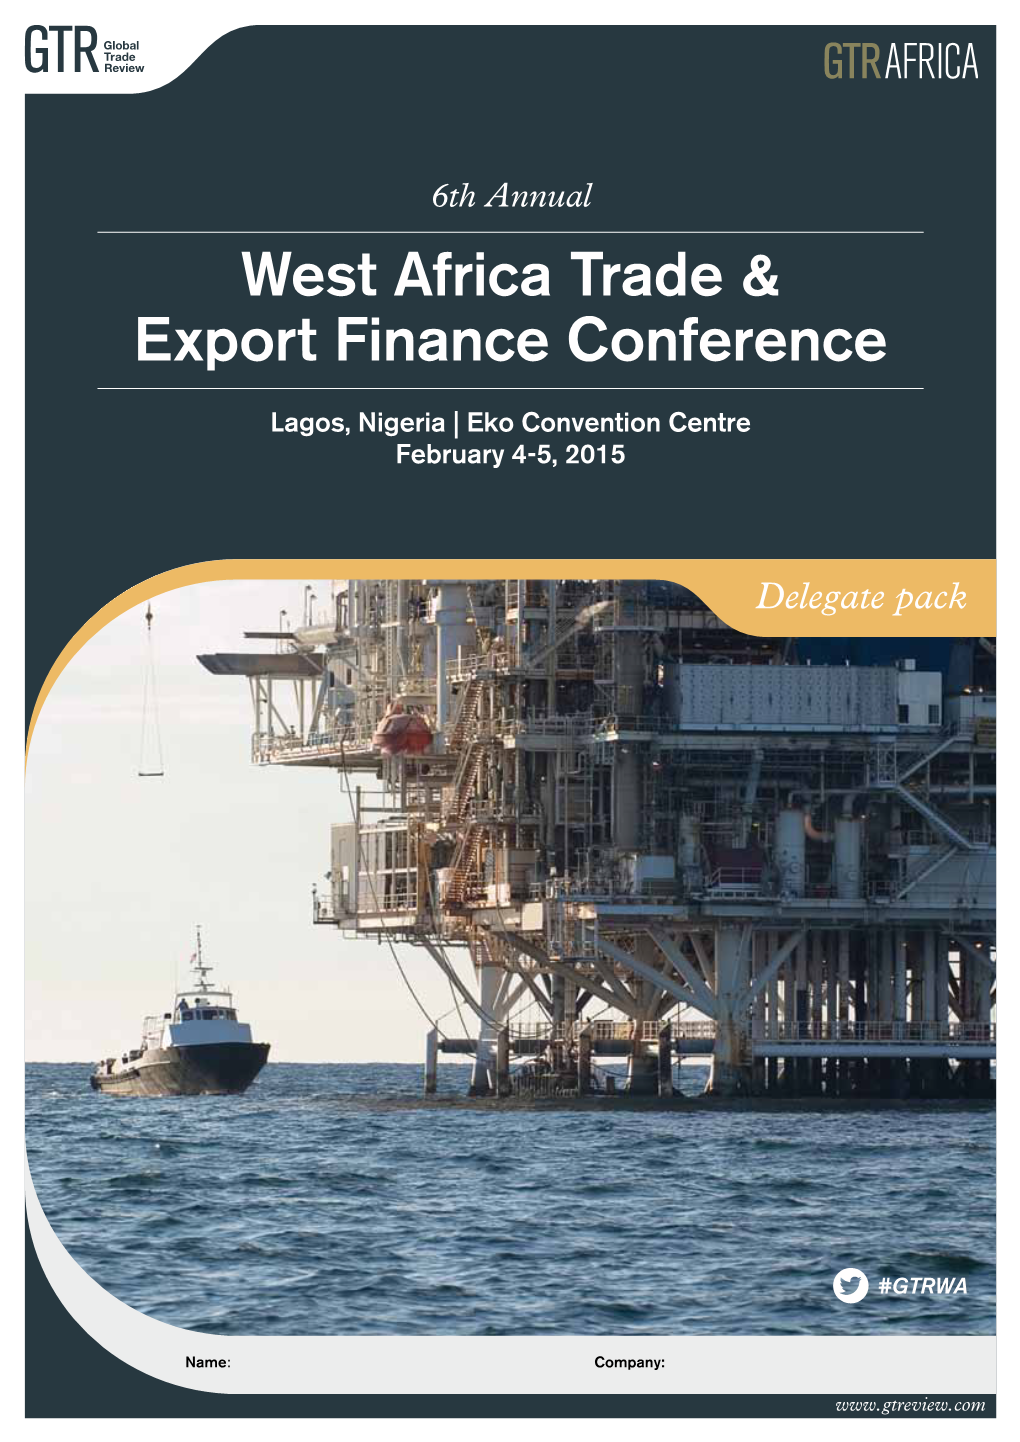 West Africa Trade & Export Finance Conference